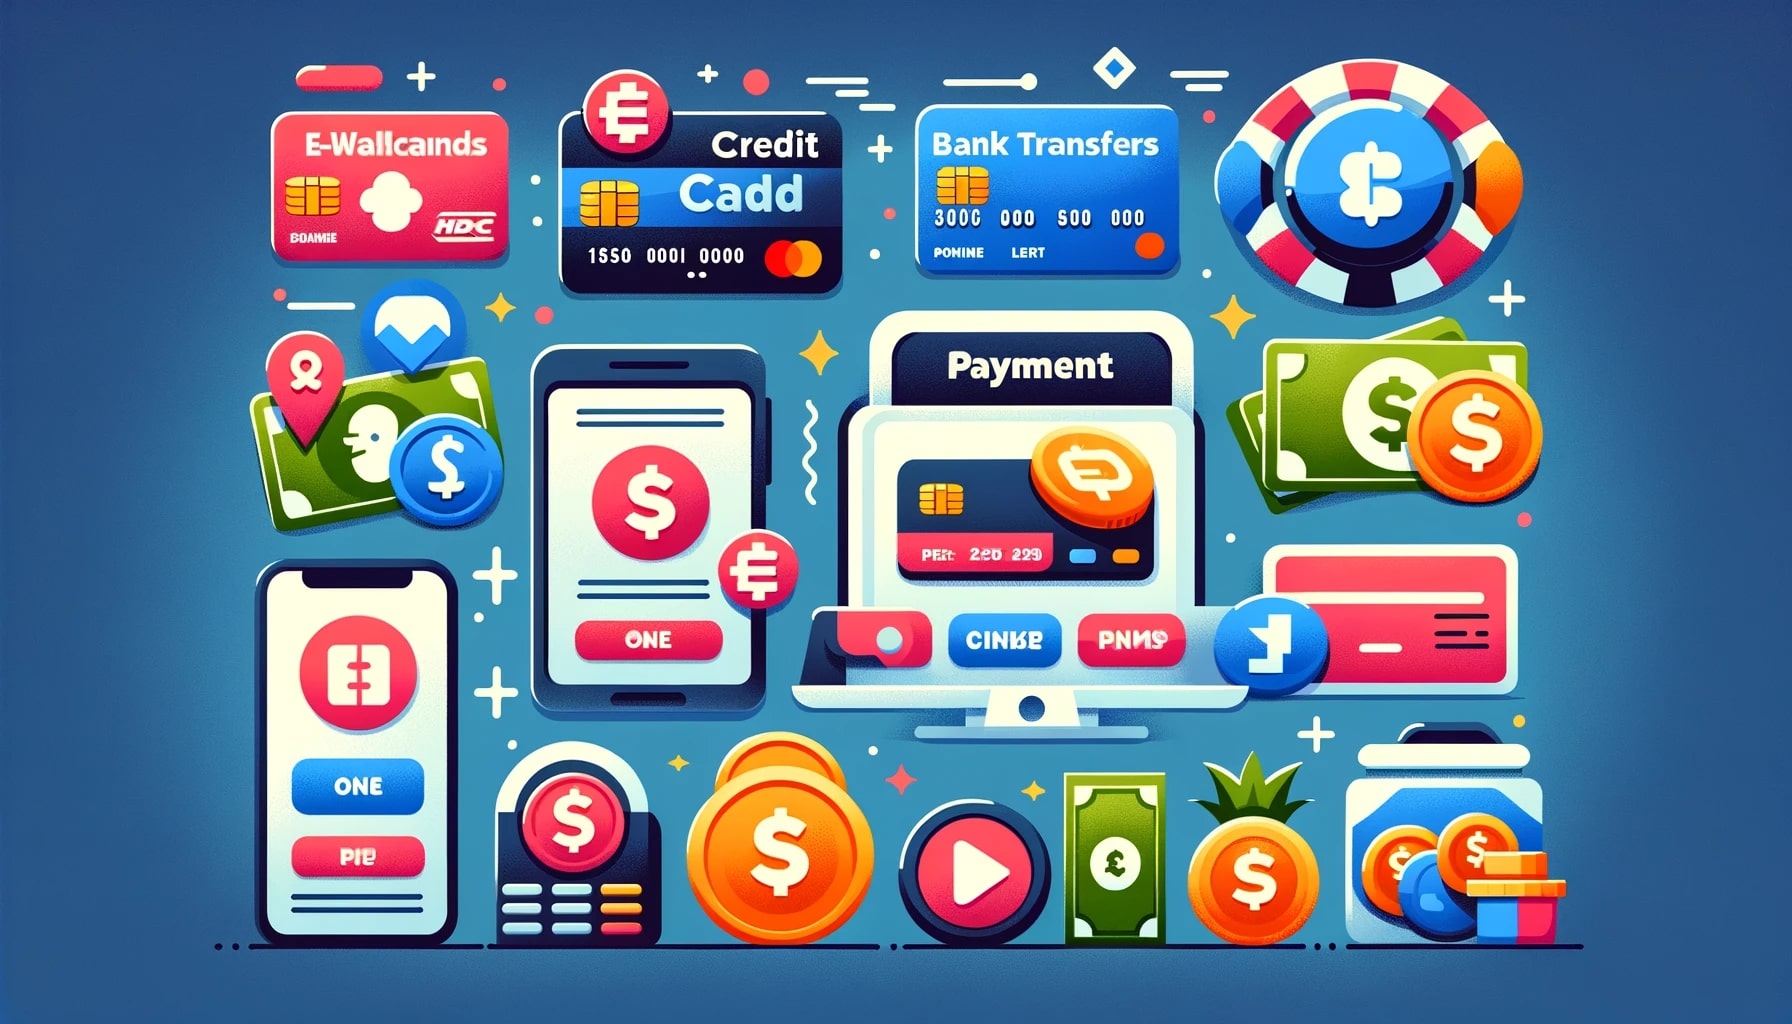 various online casino payment options, including credit cards, e-wallets, bank transfers